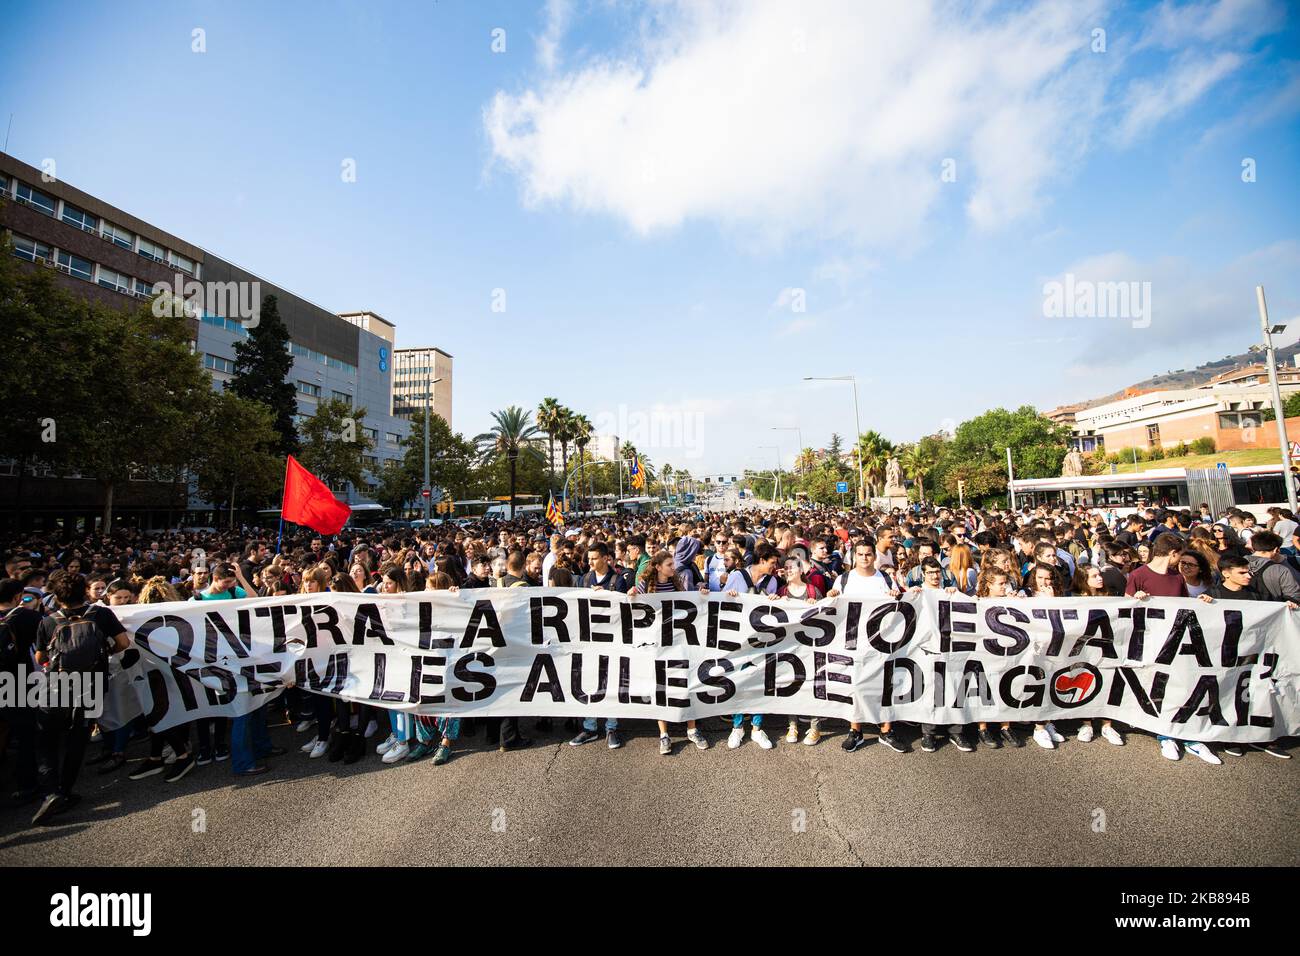 Students demonstration against the veredict of the catalan pro indepence leaders on October 14, 2019 in Barcelona, Spain. Spain's Supreme Court has sentenced nine Catalan separatist leaders to between nine and 13 years in prison over their role in the 2017 Catalan independence referendum. (Photo by Pau Venteo/NurPhoto) Stock Photo